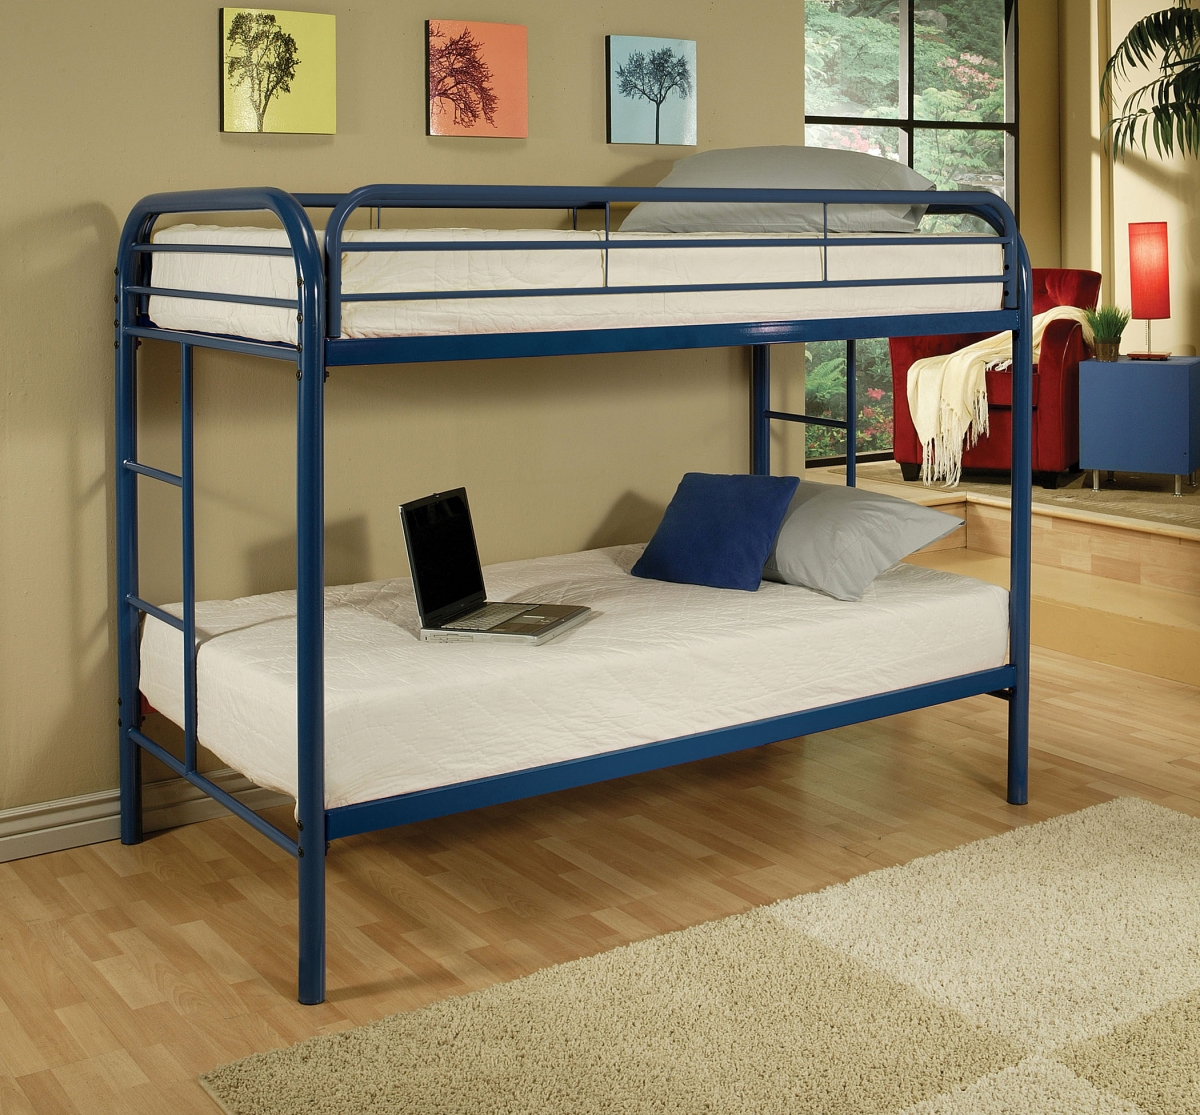 Home Roots Furniture 285198 60 X 78 X 41 In. Metal Tube Twin Bunk Bed - Blue